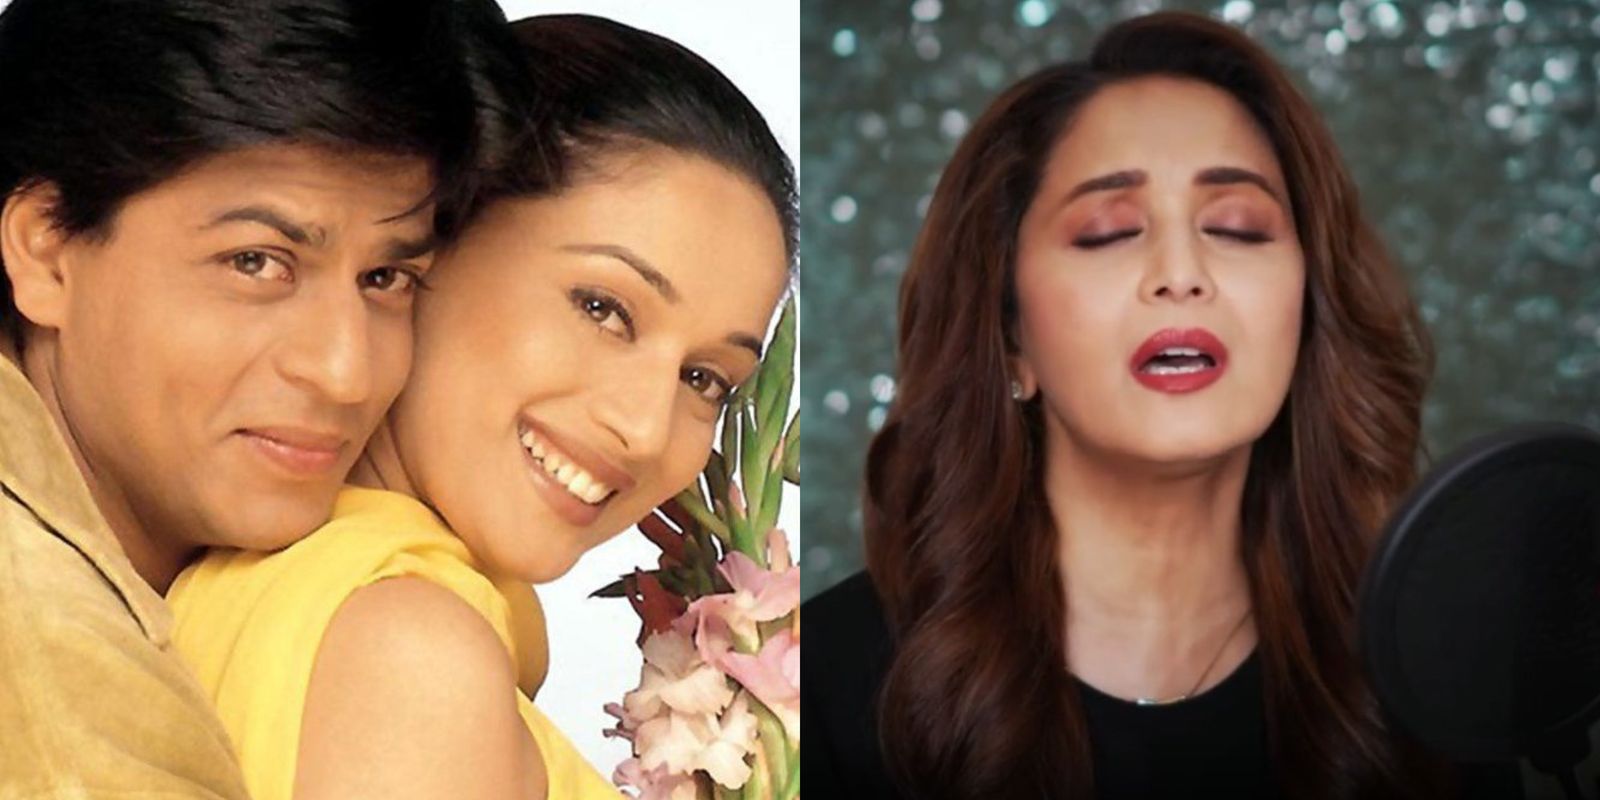 Shah Rukh Khan Lauds Madhuri Dixit’s Debut Single Candle; Reveals He Learnt His Craft From Her